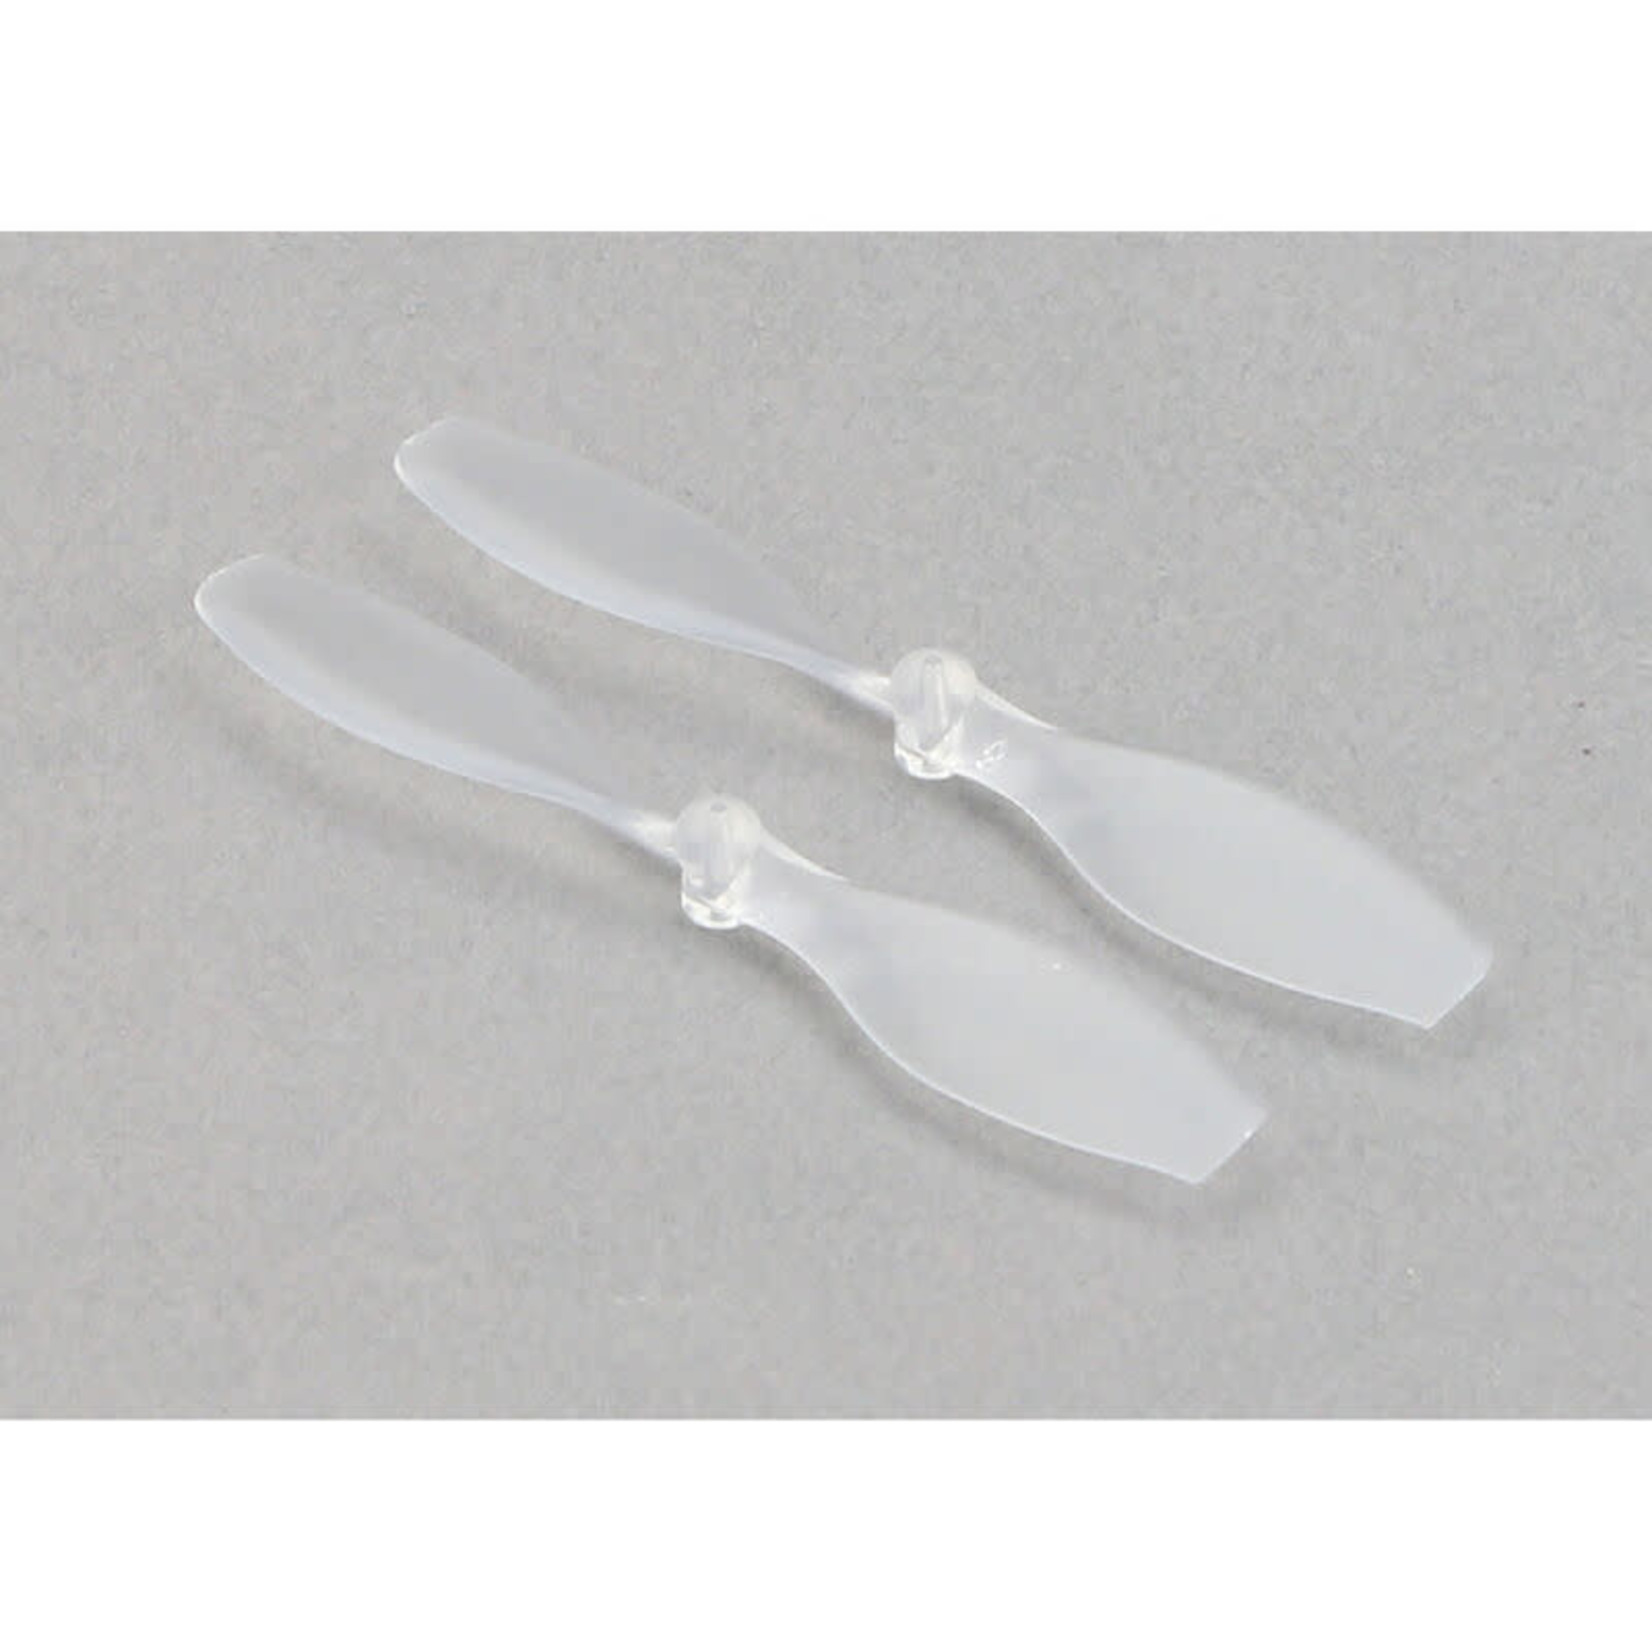 Blade BLH7204 Blade Prop Counter-Clockwise Rotation Clear (2): Nano QX